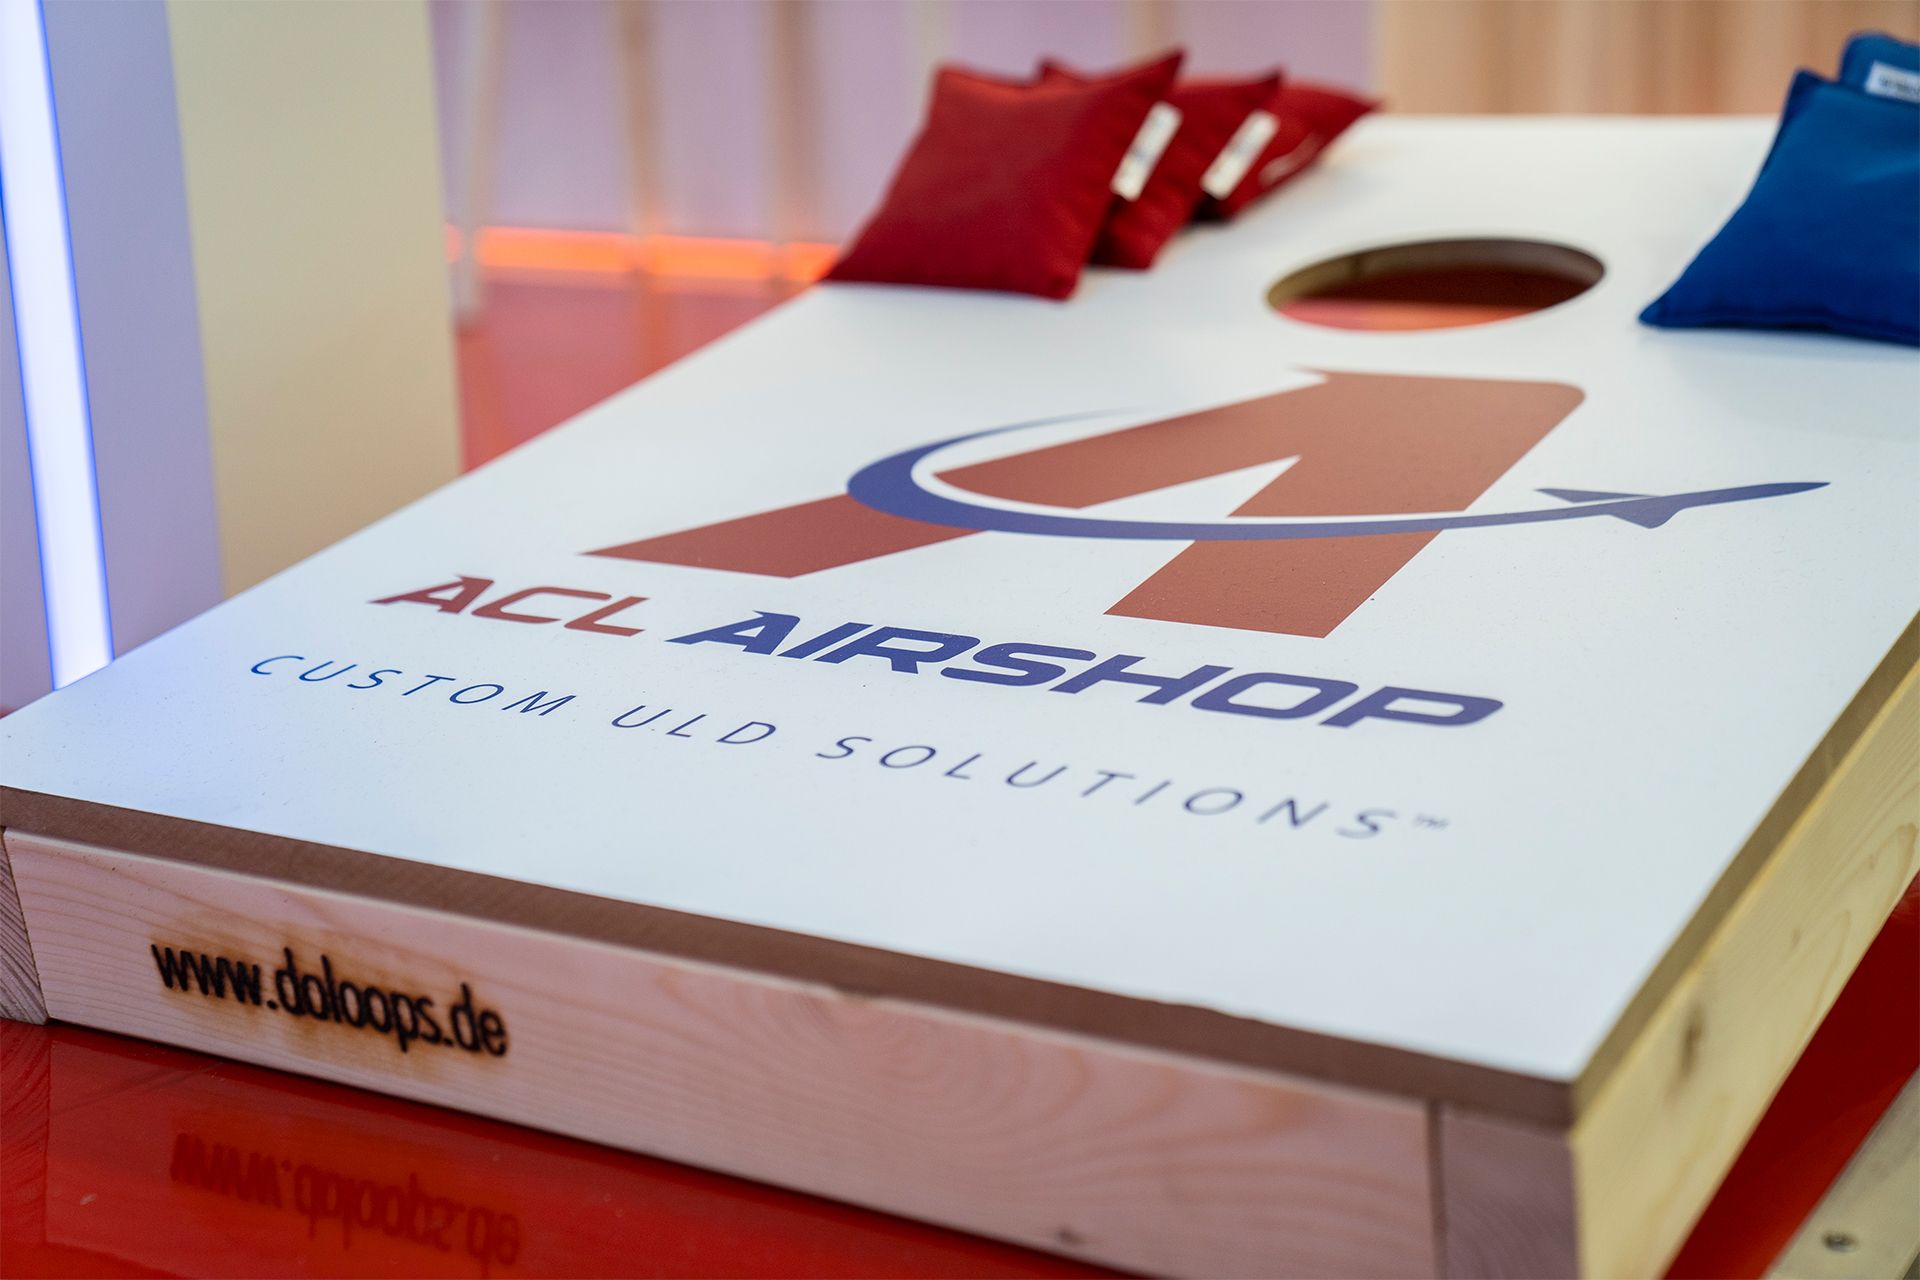 Cornhole board game with ACL Airshop logo